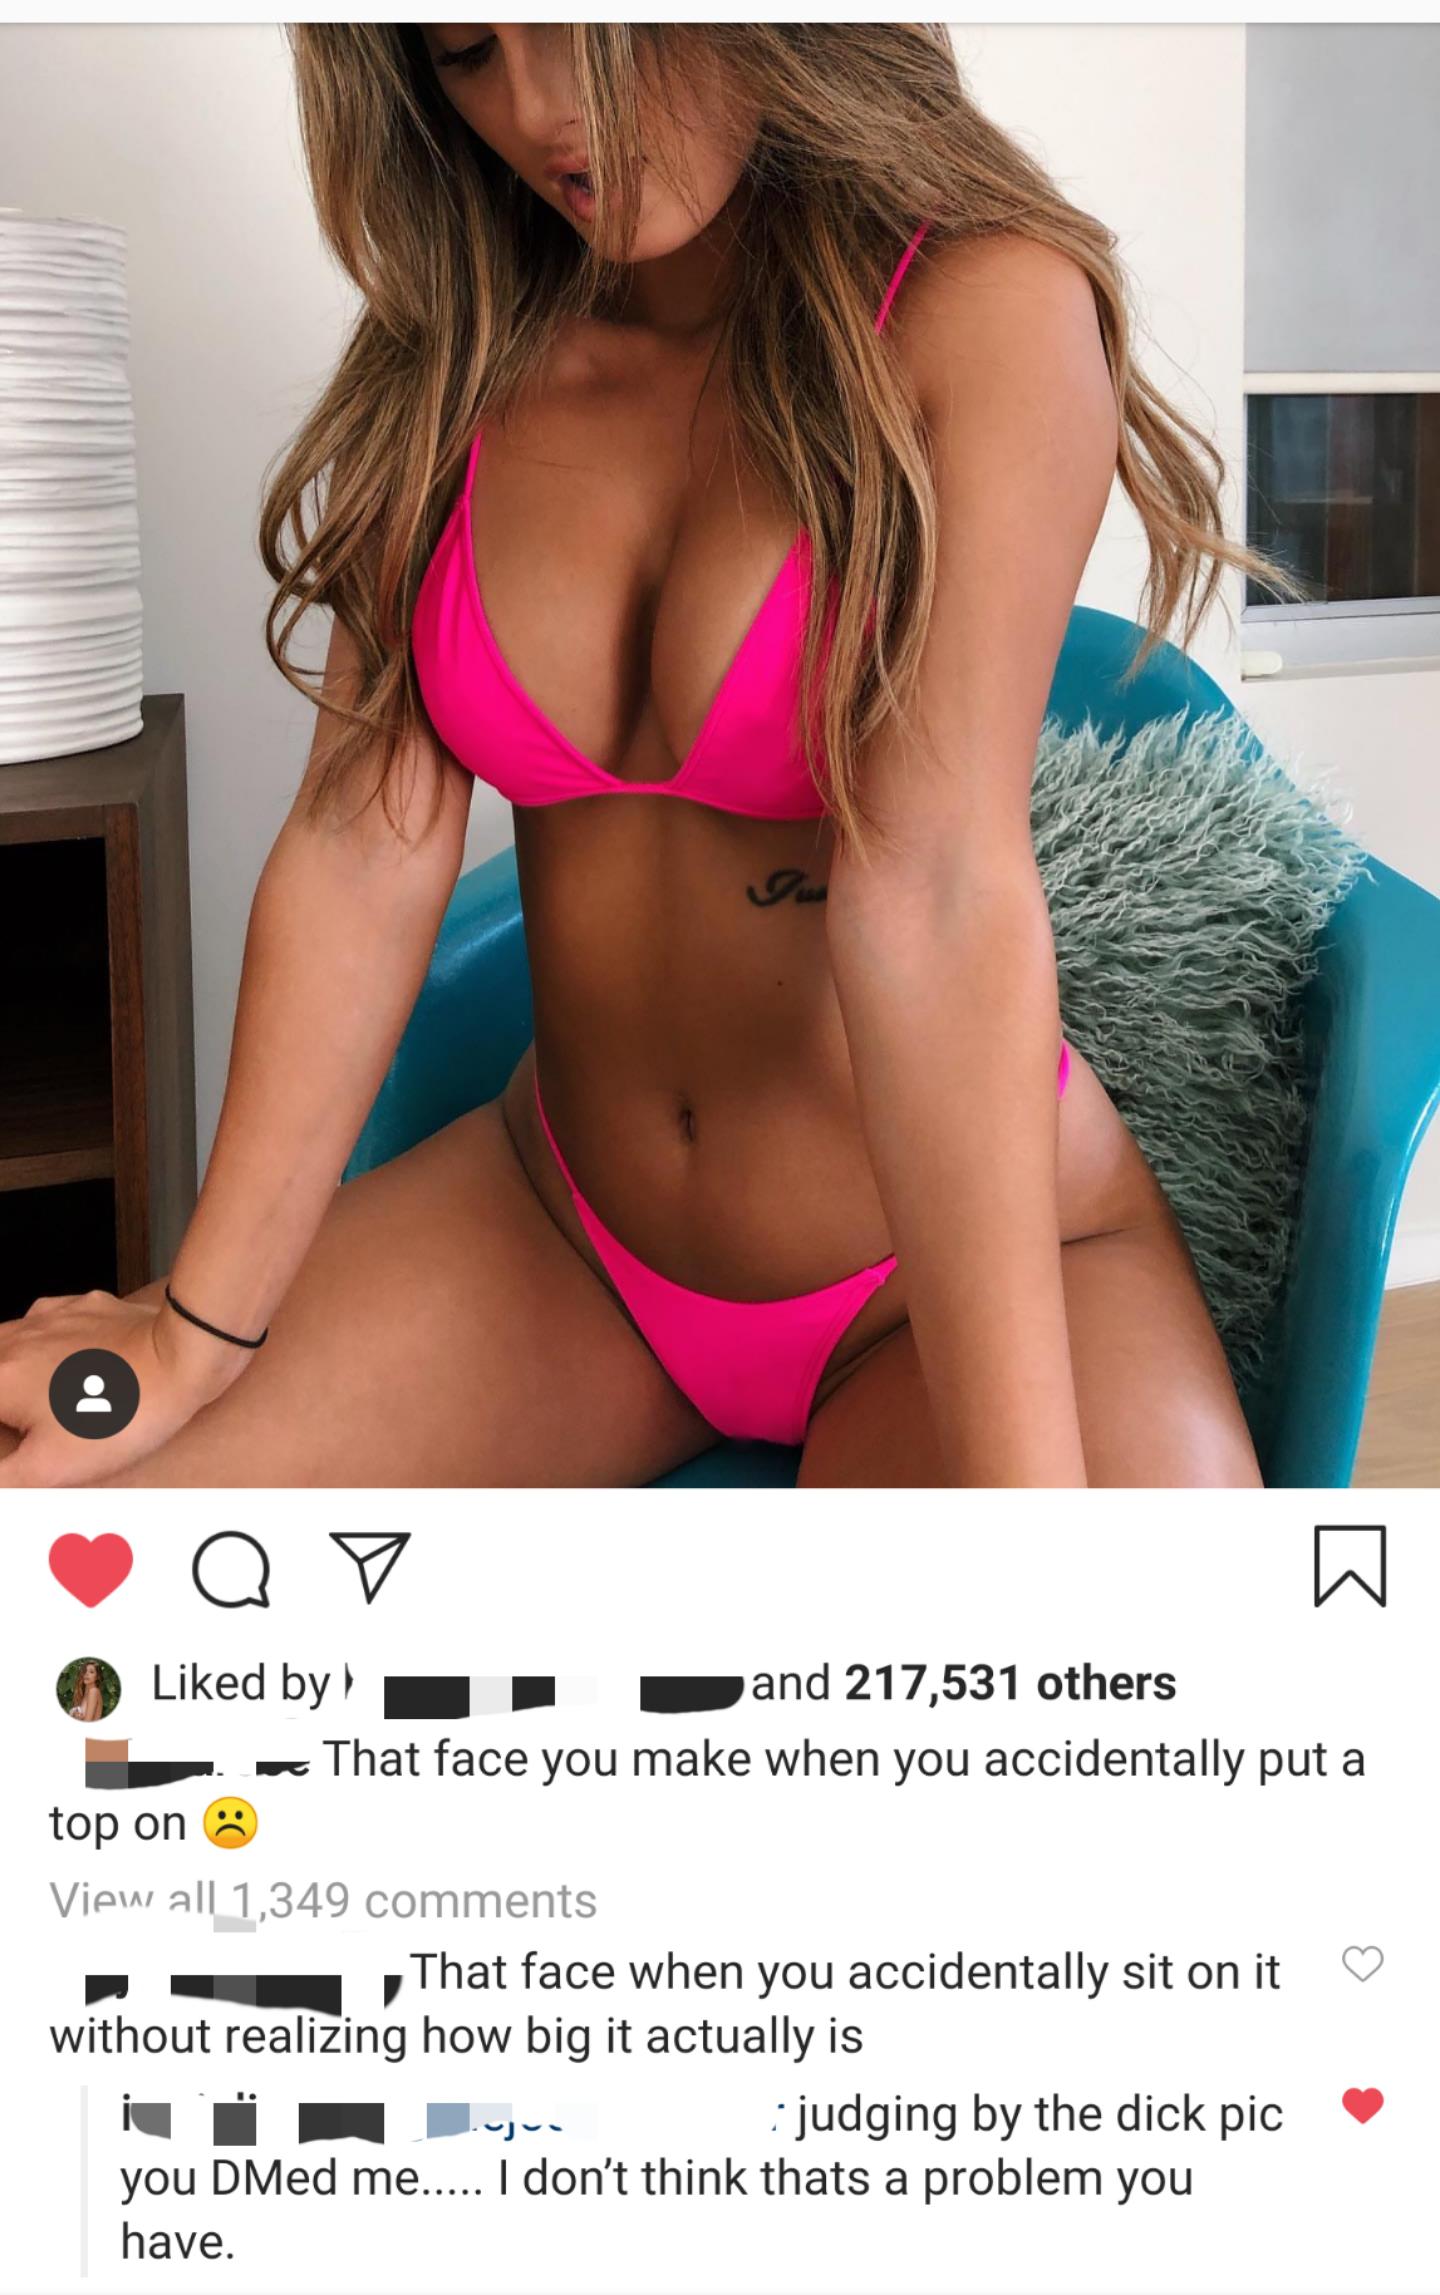 bikini - O d by and 217,531 others 1. That face you make when you accidentally put a top on View all 1,349 That face when you accidentally sit on it without realizing how big it actually is i Jujur judging by the dick pic you DMed me..... I don't think th